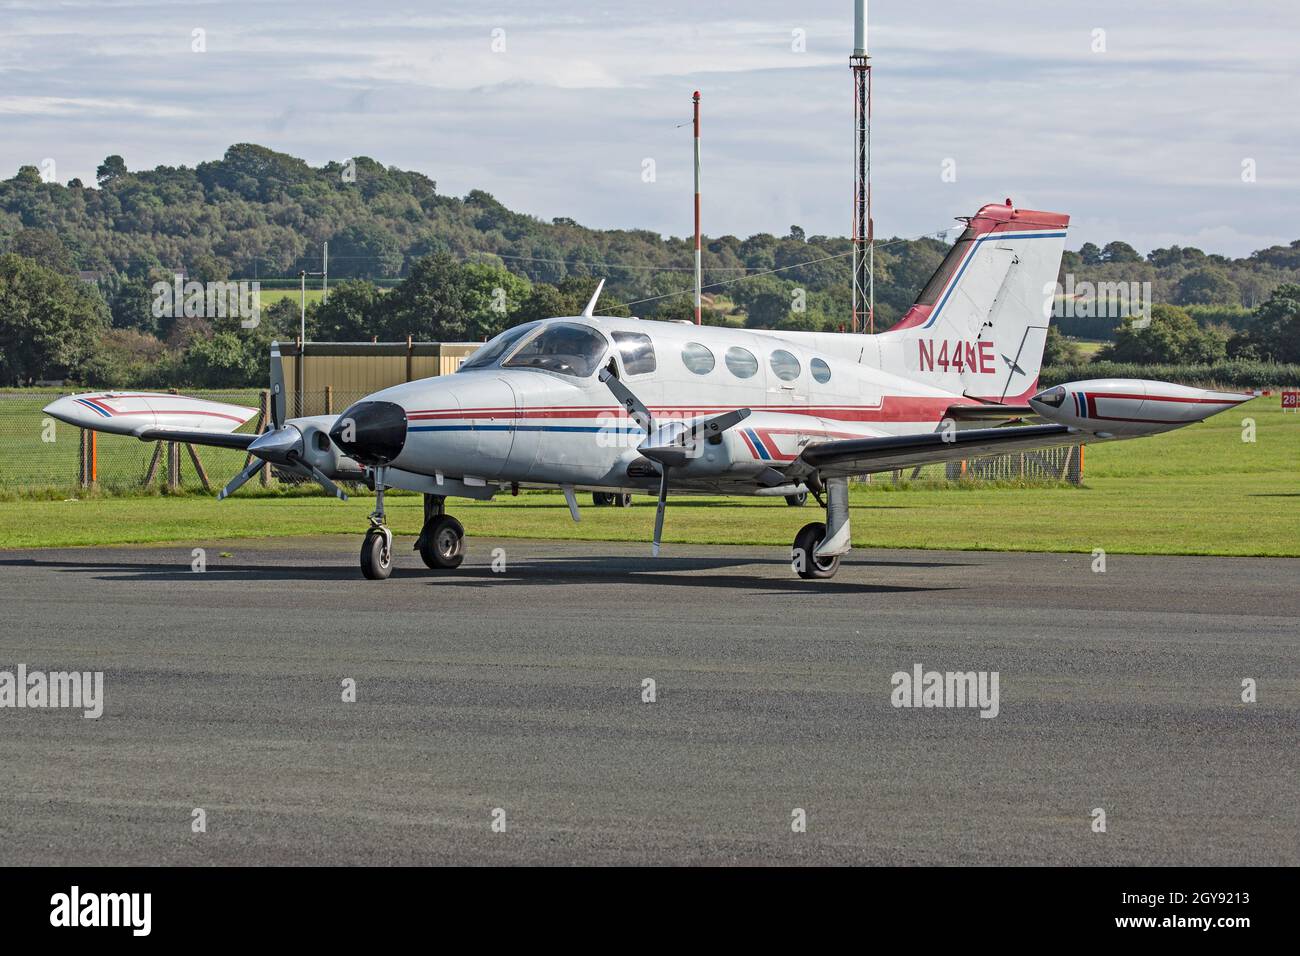 A Cessna 414 Twin Engines Turboprop Commuter plane, N44NE, at Halfpenny Green Wolverhampton Airport, England. Stock Photo